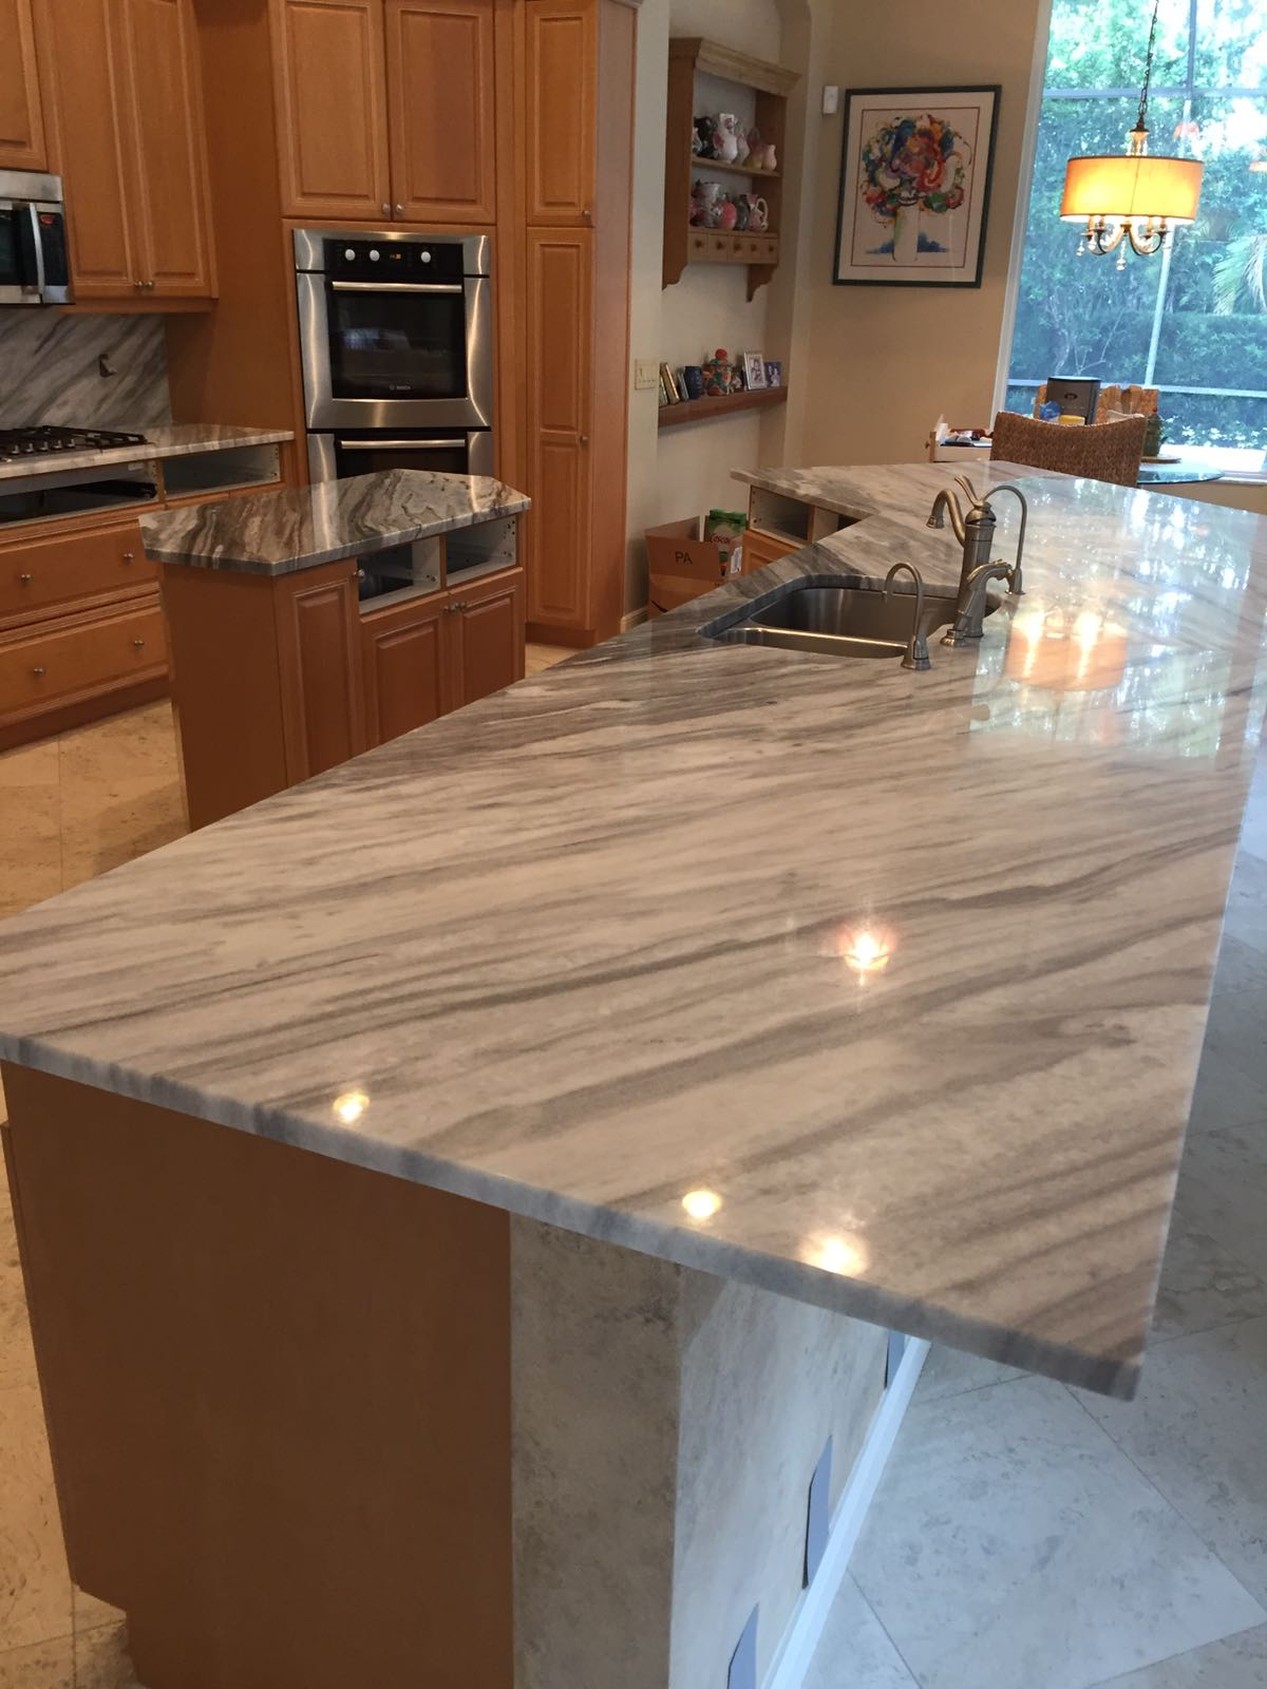 WHY SHOULD I CHOOSE GRANITE FOR MY NEW COUNTERTOPS?